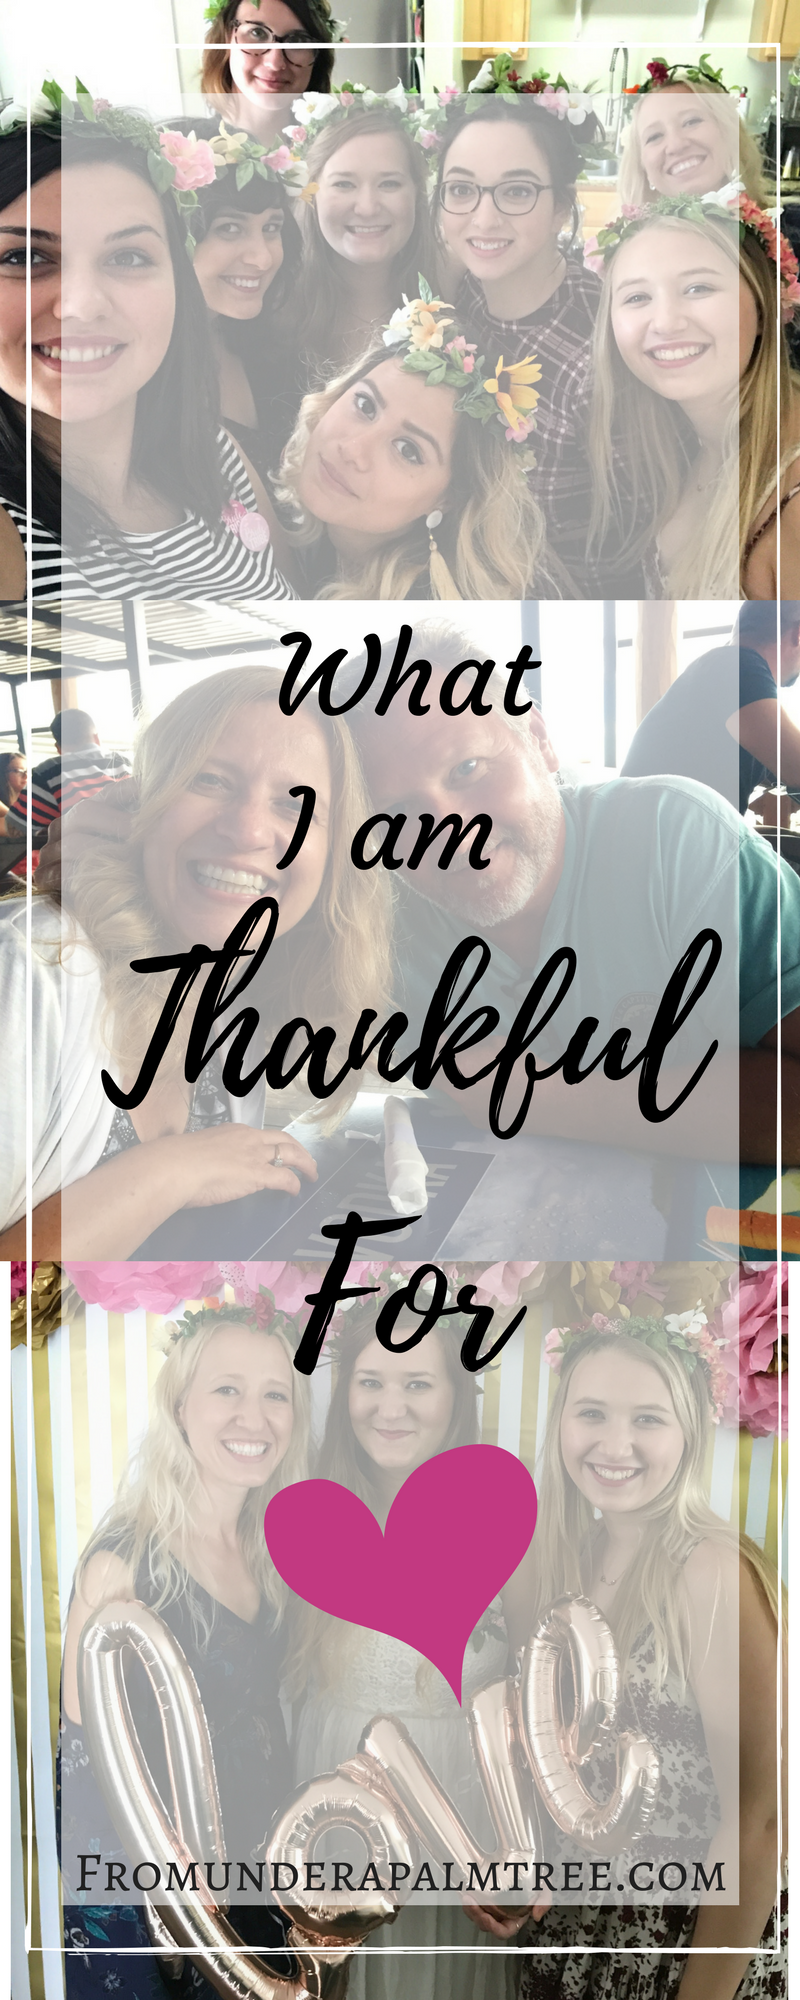 What to be thankful for | What I am thankful for | Thanksgiving | Friendsgiving | thankful | friends | Family | getting married | wedding | LIfestyle blog | From Under a Palm Tree